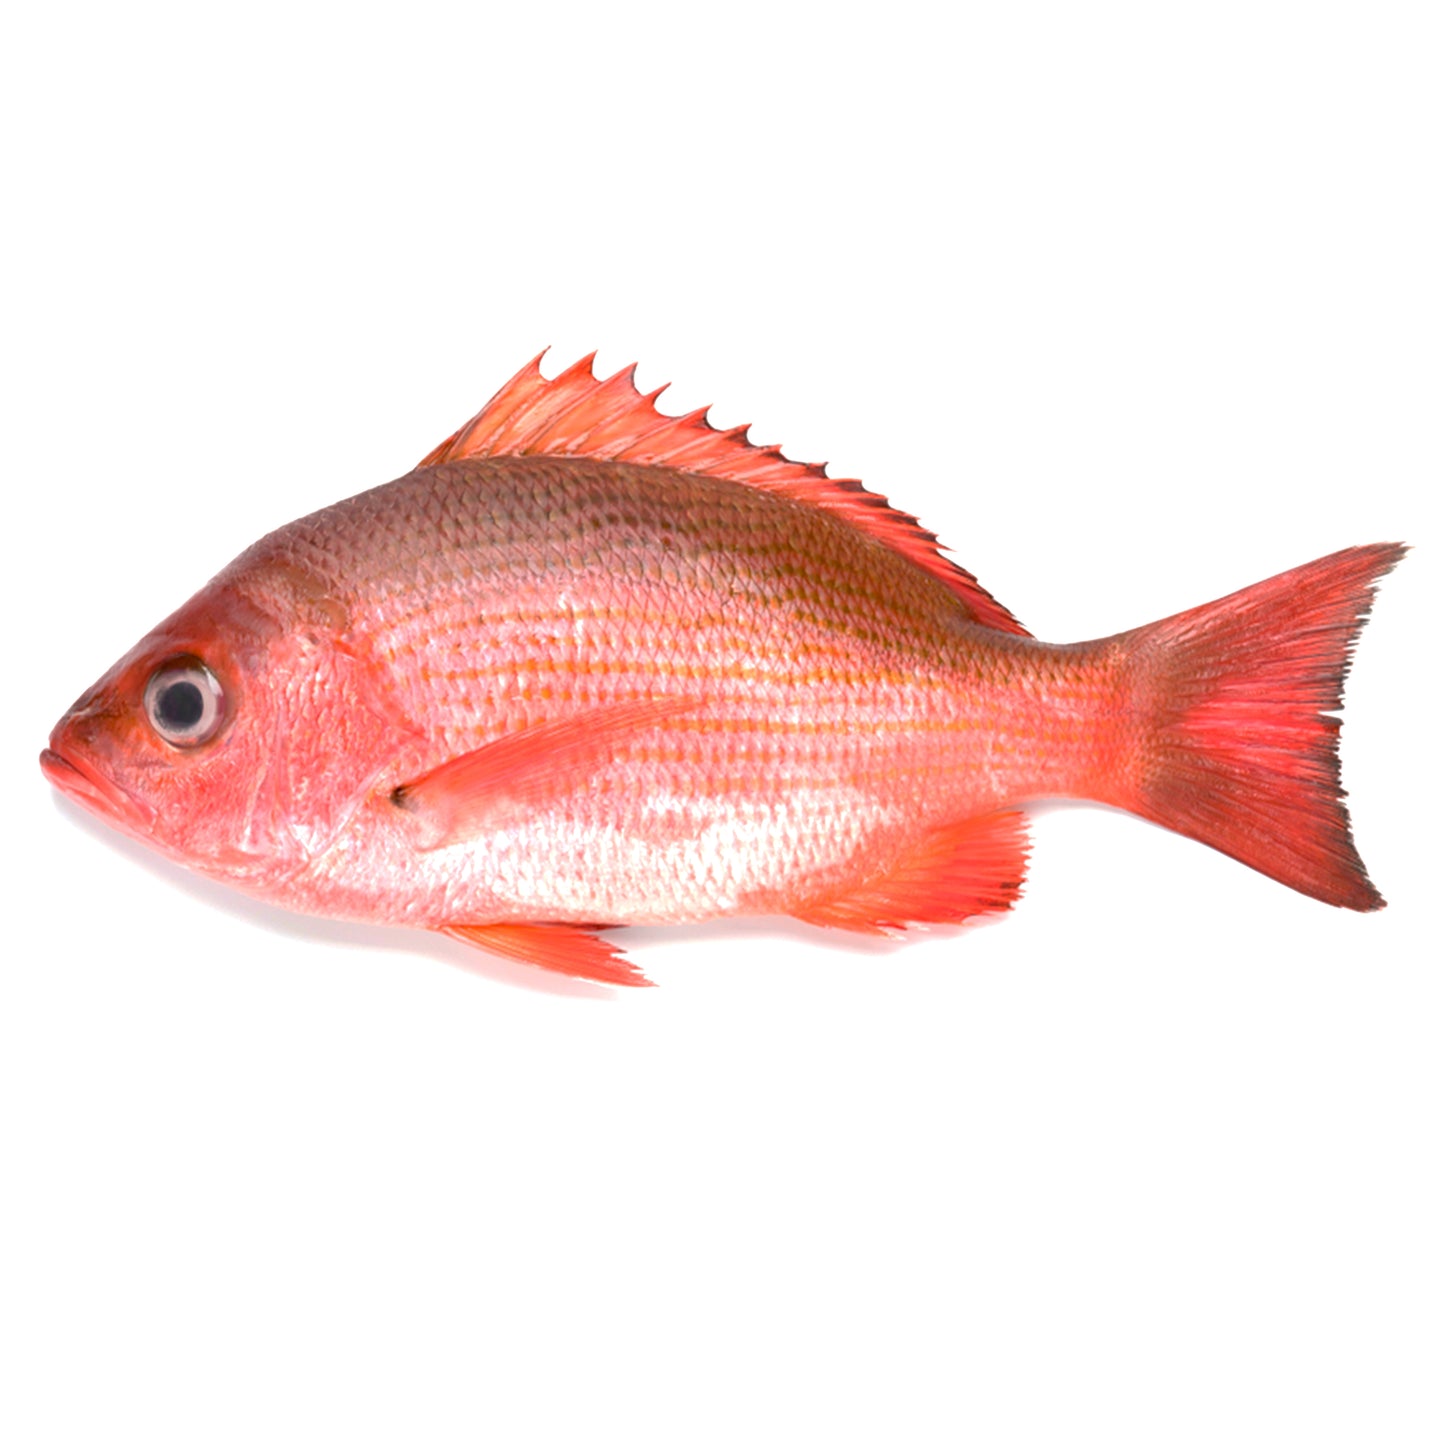 Red Snapper 1-2 lbs